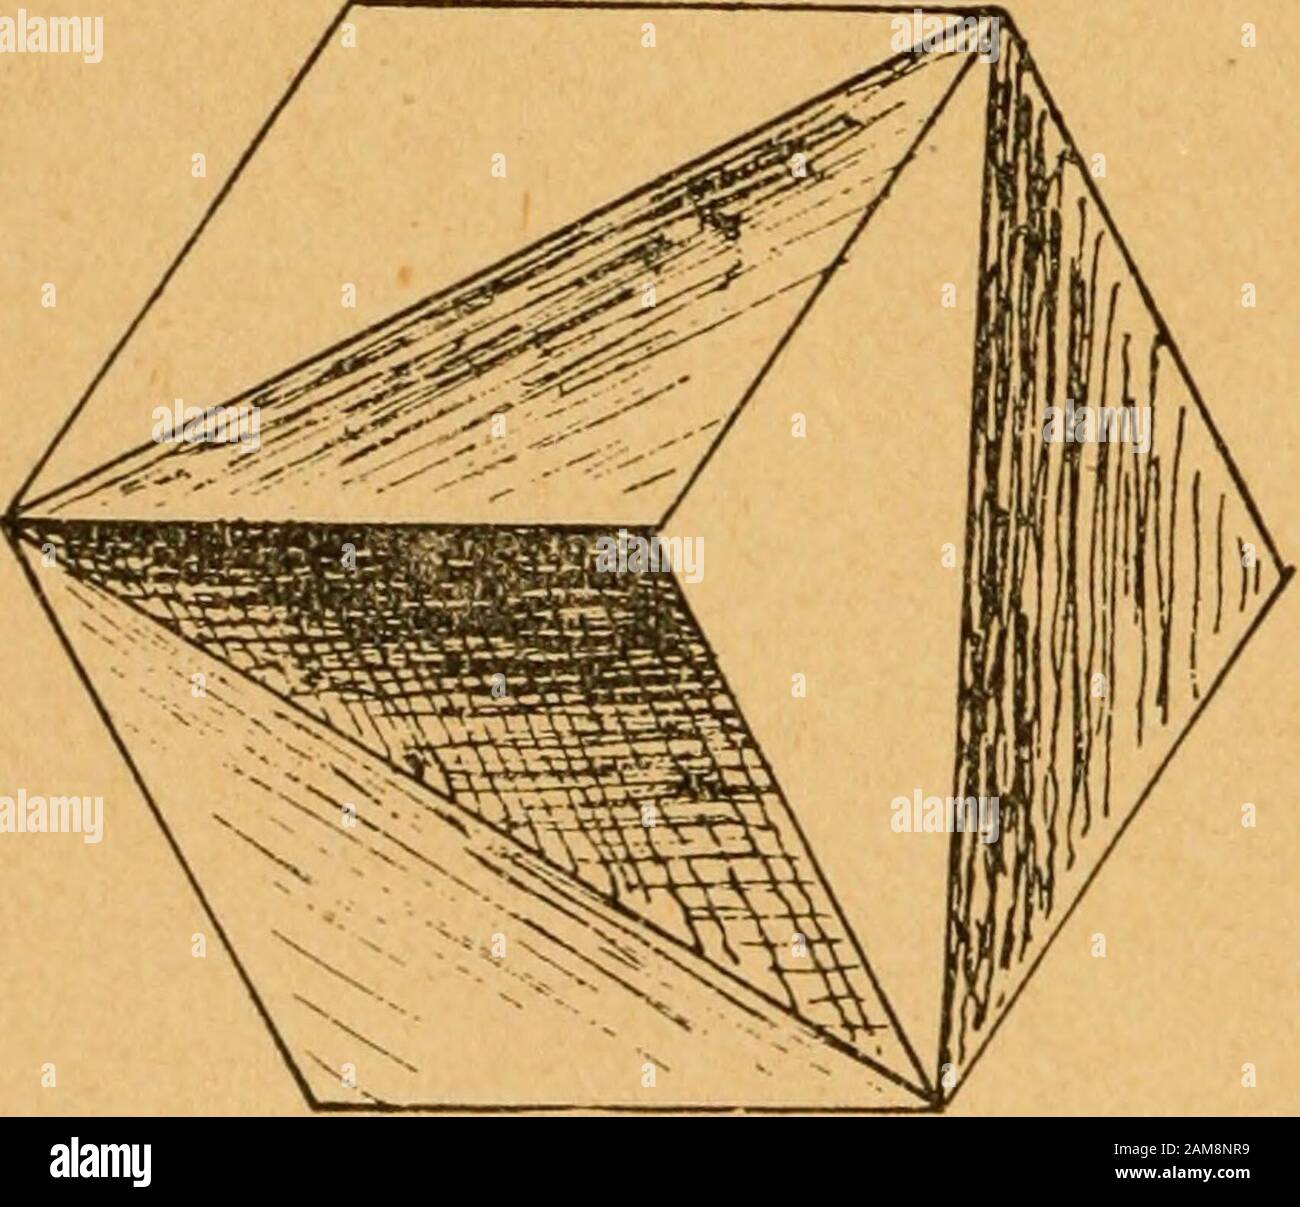 Construction work in cardboard and paper for grades I to IV, without the use of tools; with a course in woodwork for the fifth grade . on the adjoining branchyy y,y, y,and bind the construction by the return of the small tri-angles. A triangle having three equal sides is formed atthe center of the square. Materials.—Nos. 25 and 26. The cube is made and it is only necessary to pinch thecorners to make it firm. u*c r -  V^ r1 l /? | /  /    / i 1 0 / o s M y/C / 1 1 1 56. Stock Photo